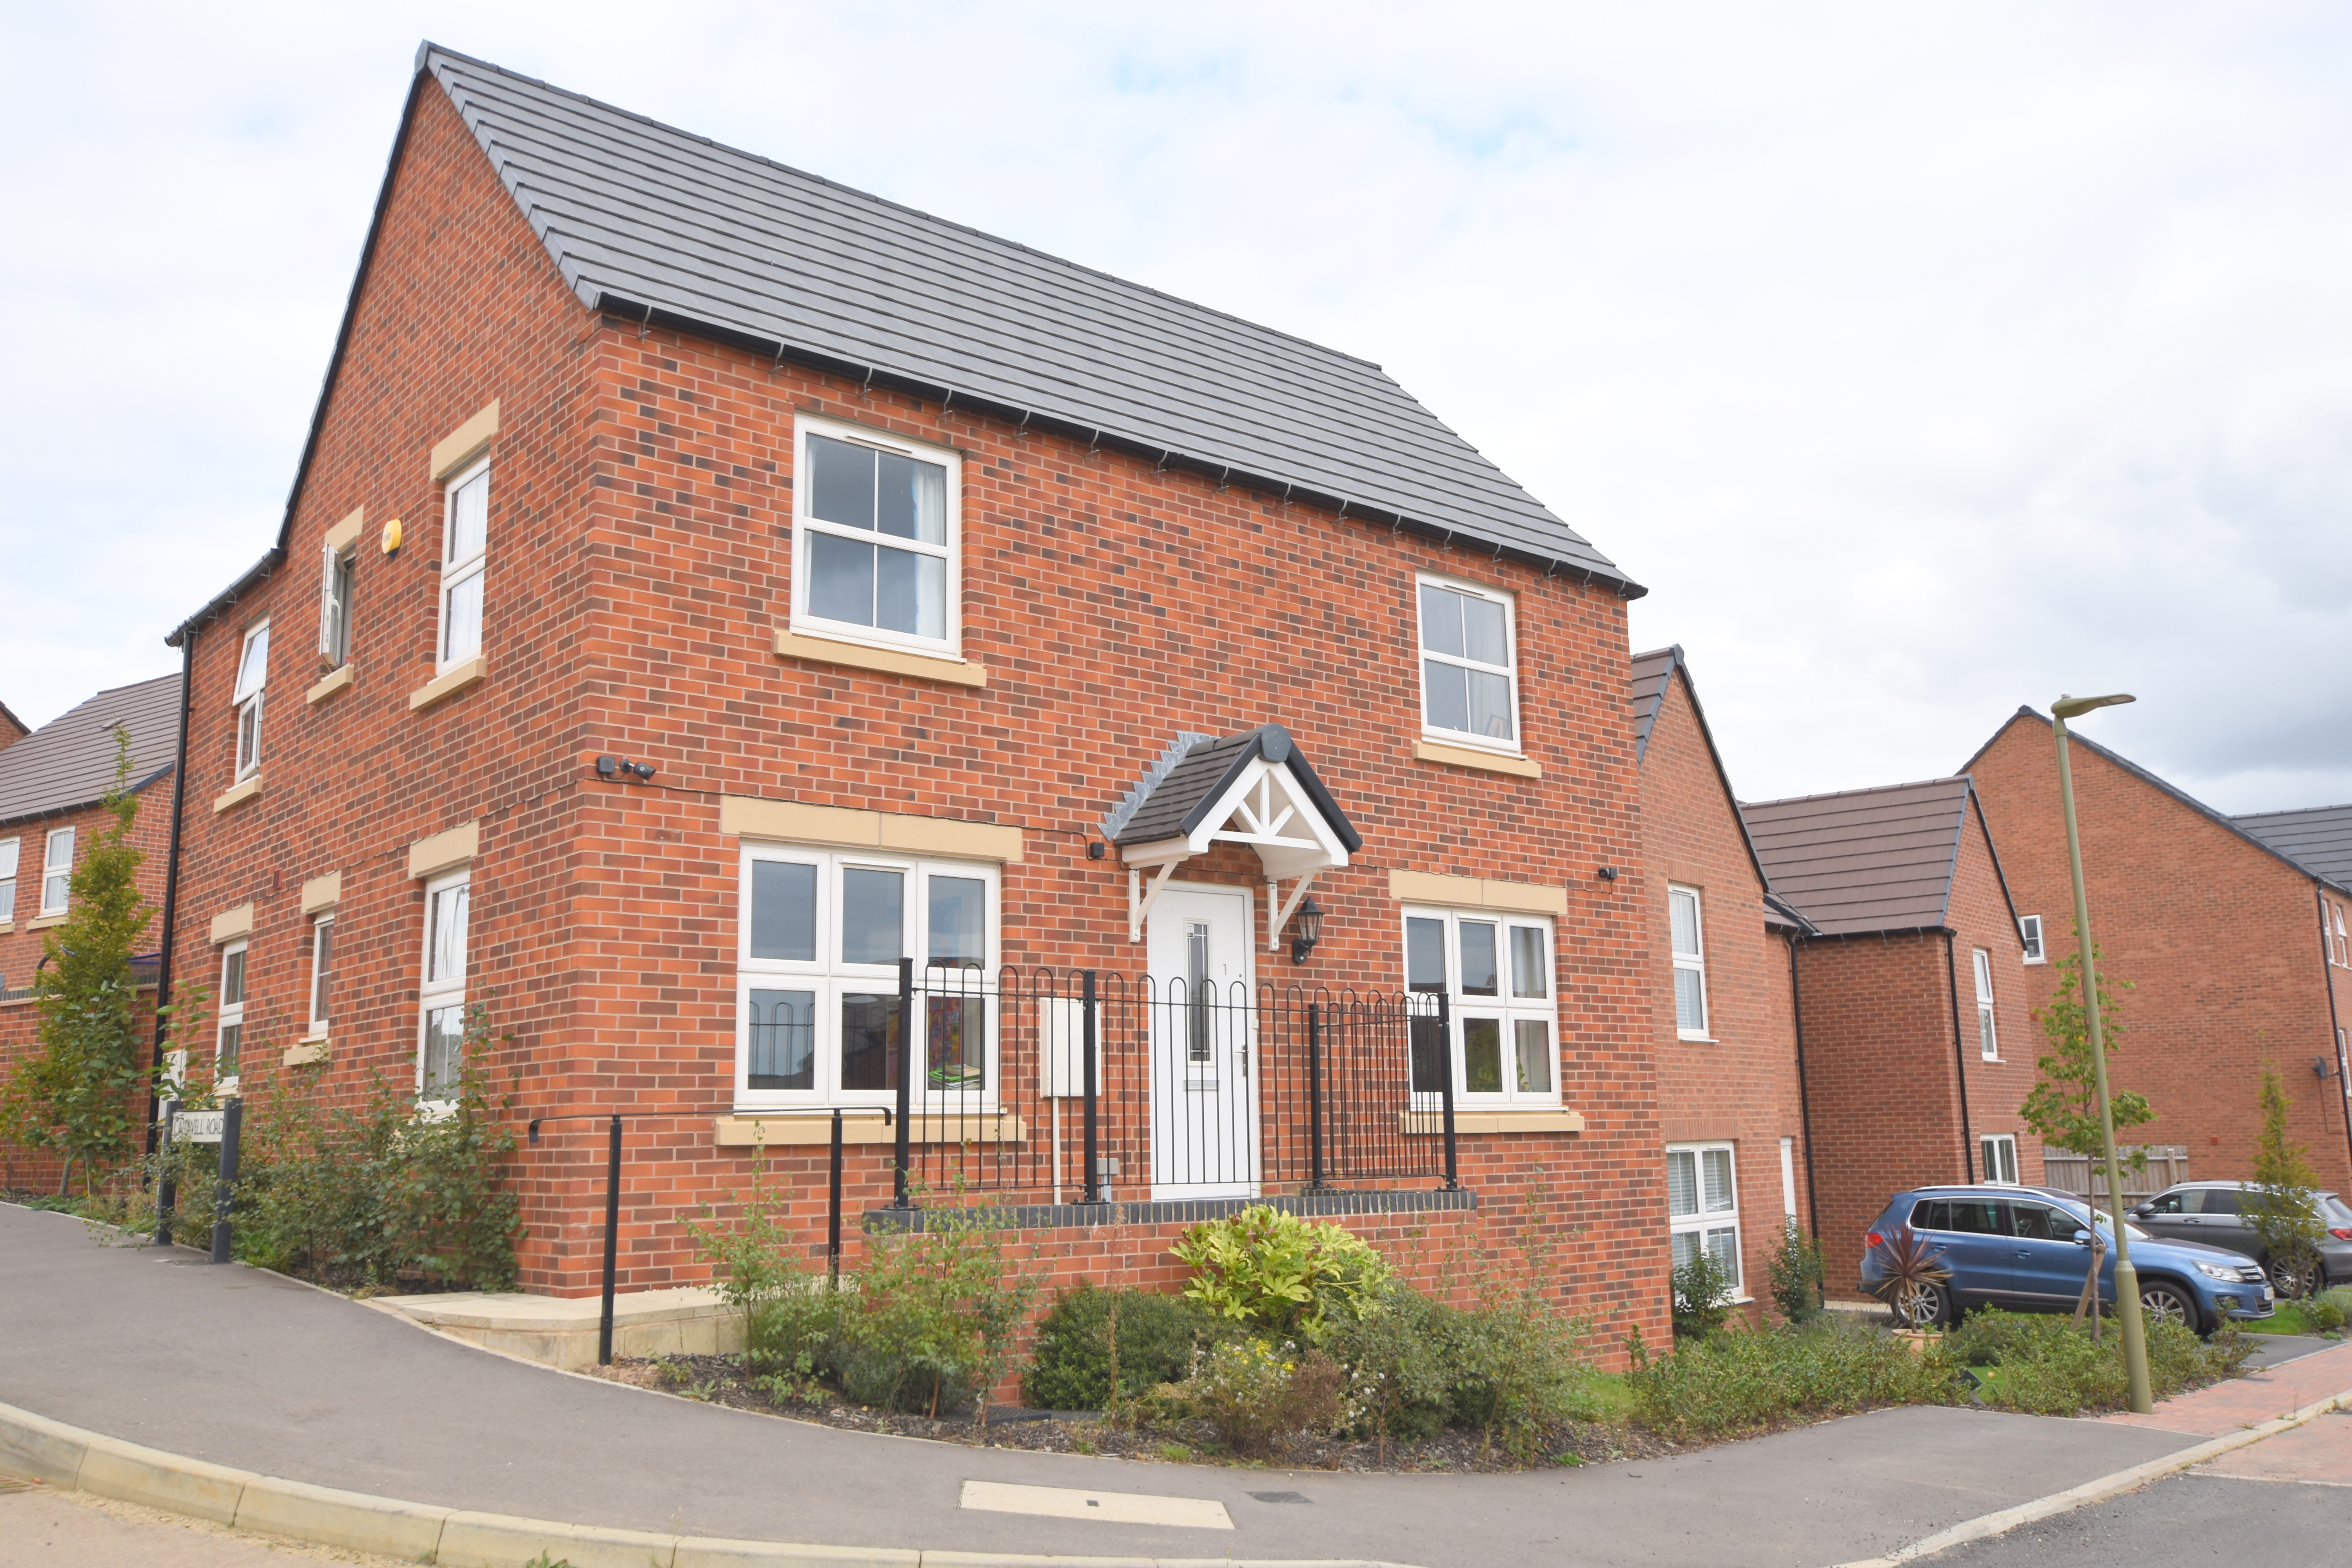 4 bed  for sale in Hearn Drive, Banbury  - Property Image 1